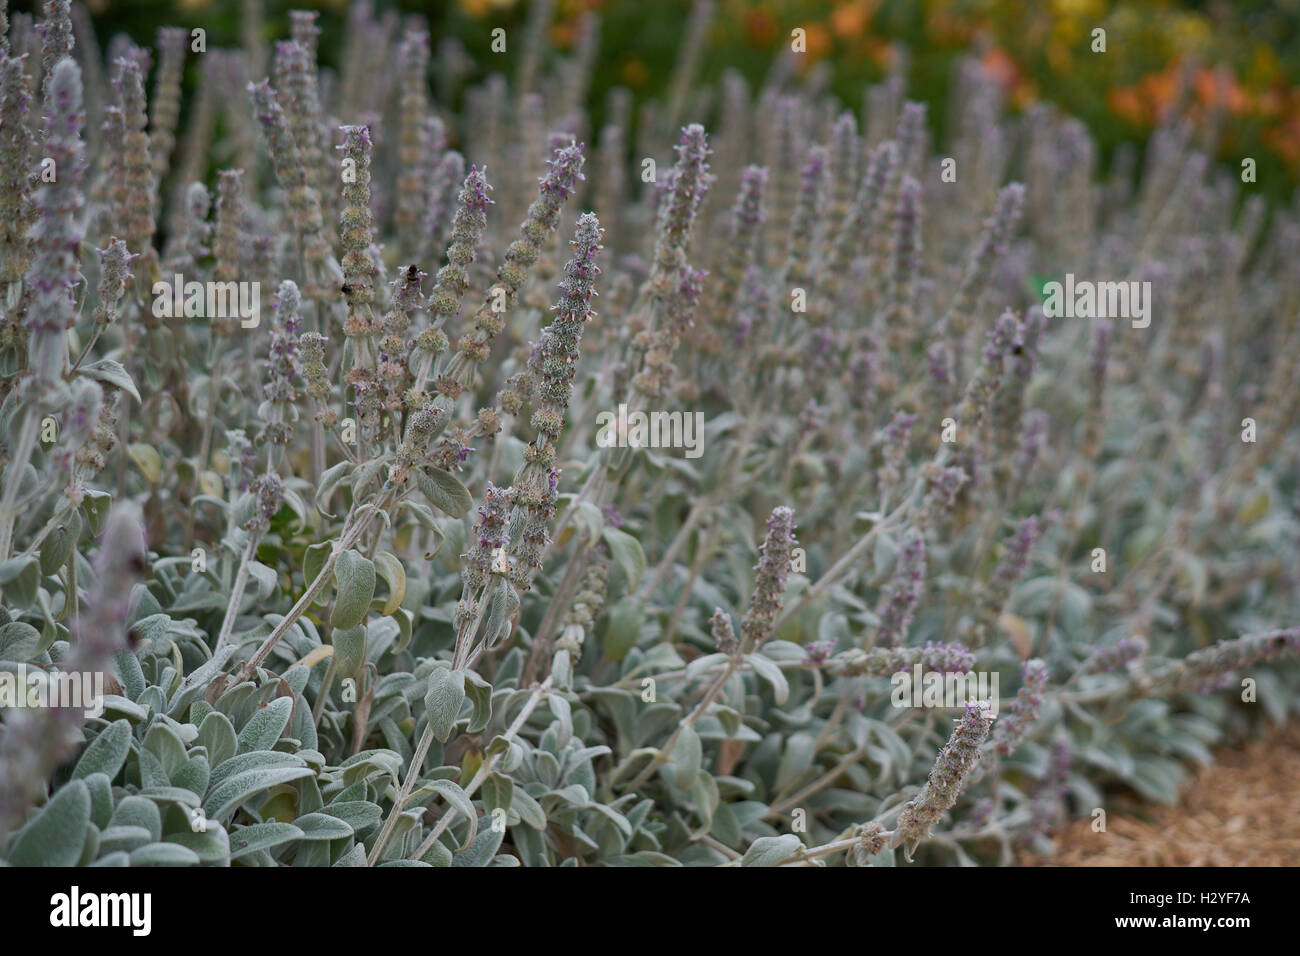 Blooming lamb's ears flowers Stachys byzantina Stock Photo